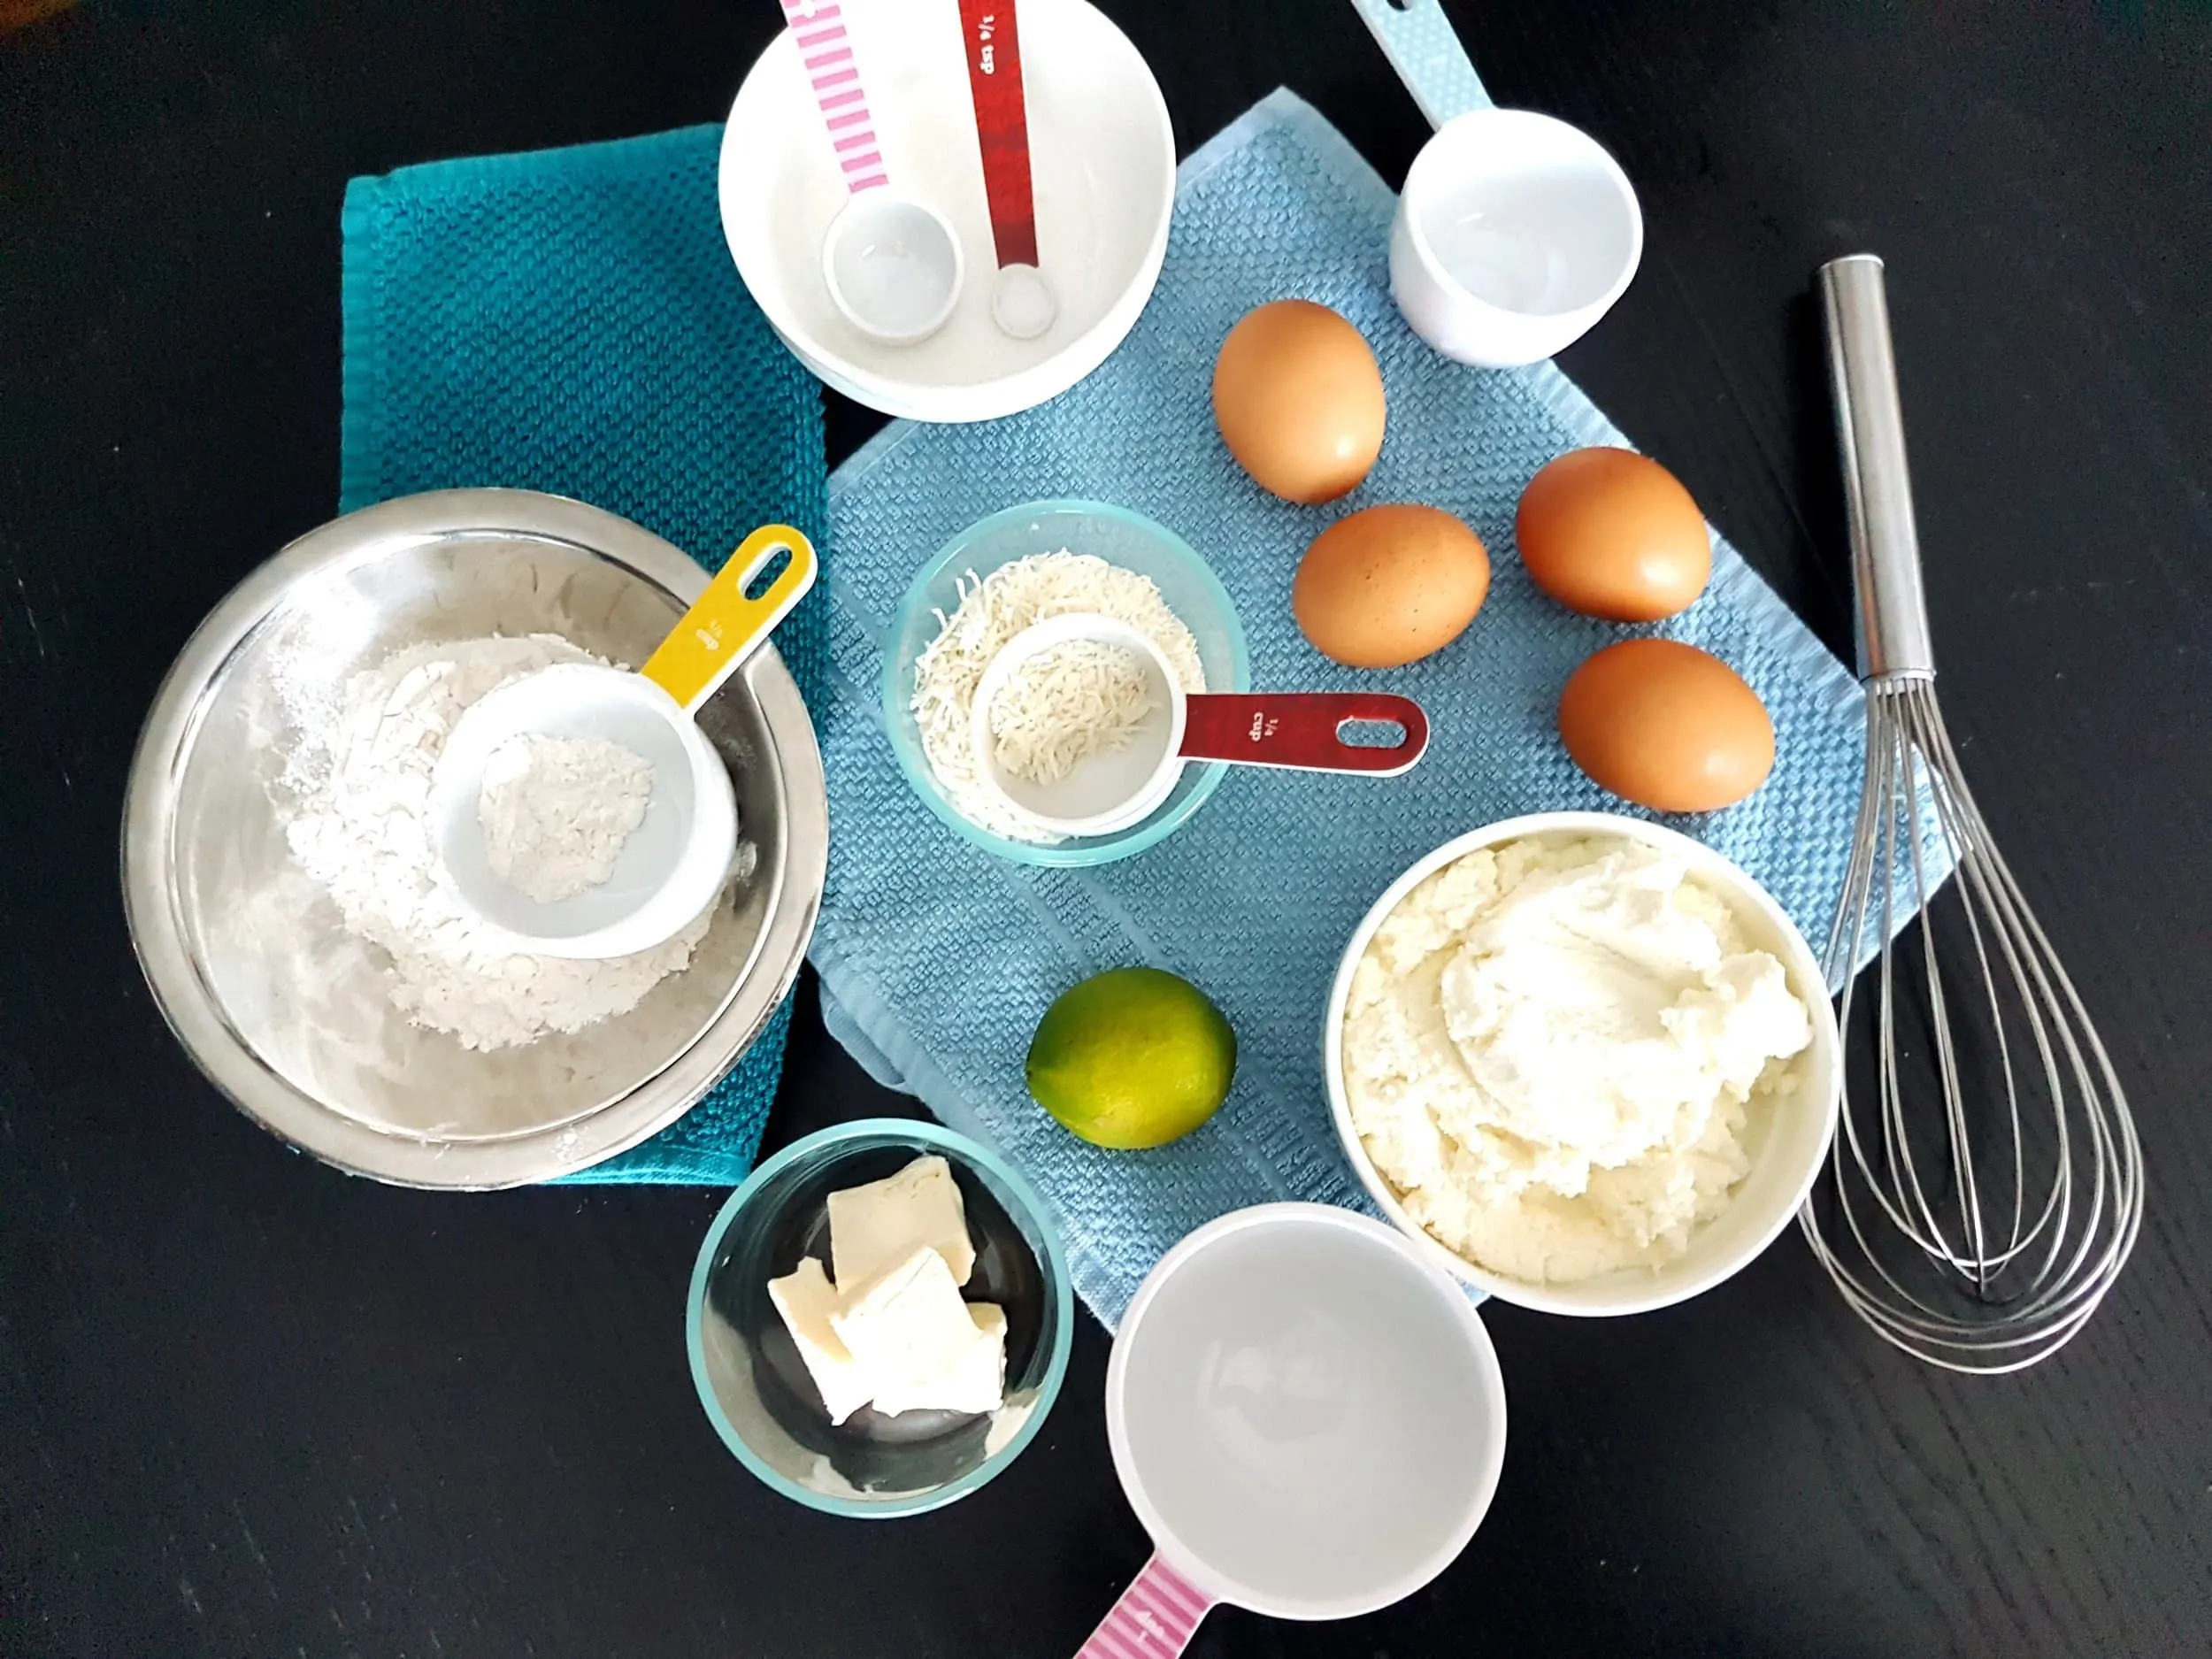 Bowls of ricotta, flour, butter, and coconut accompanied by lime and eggs.